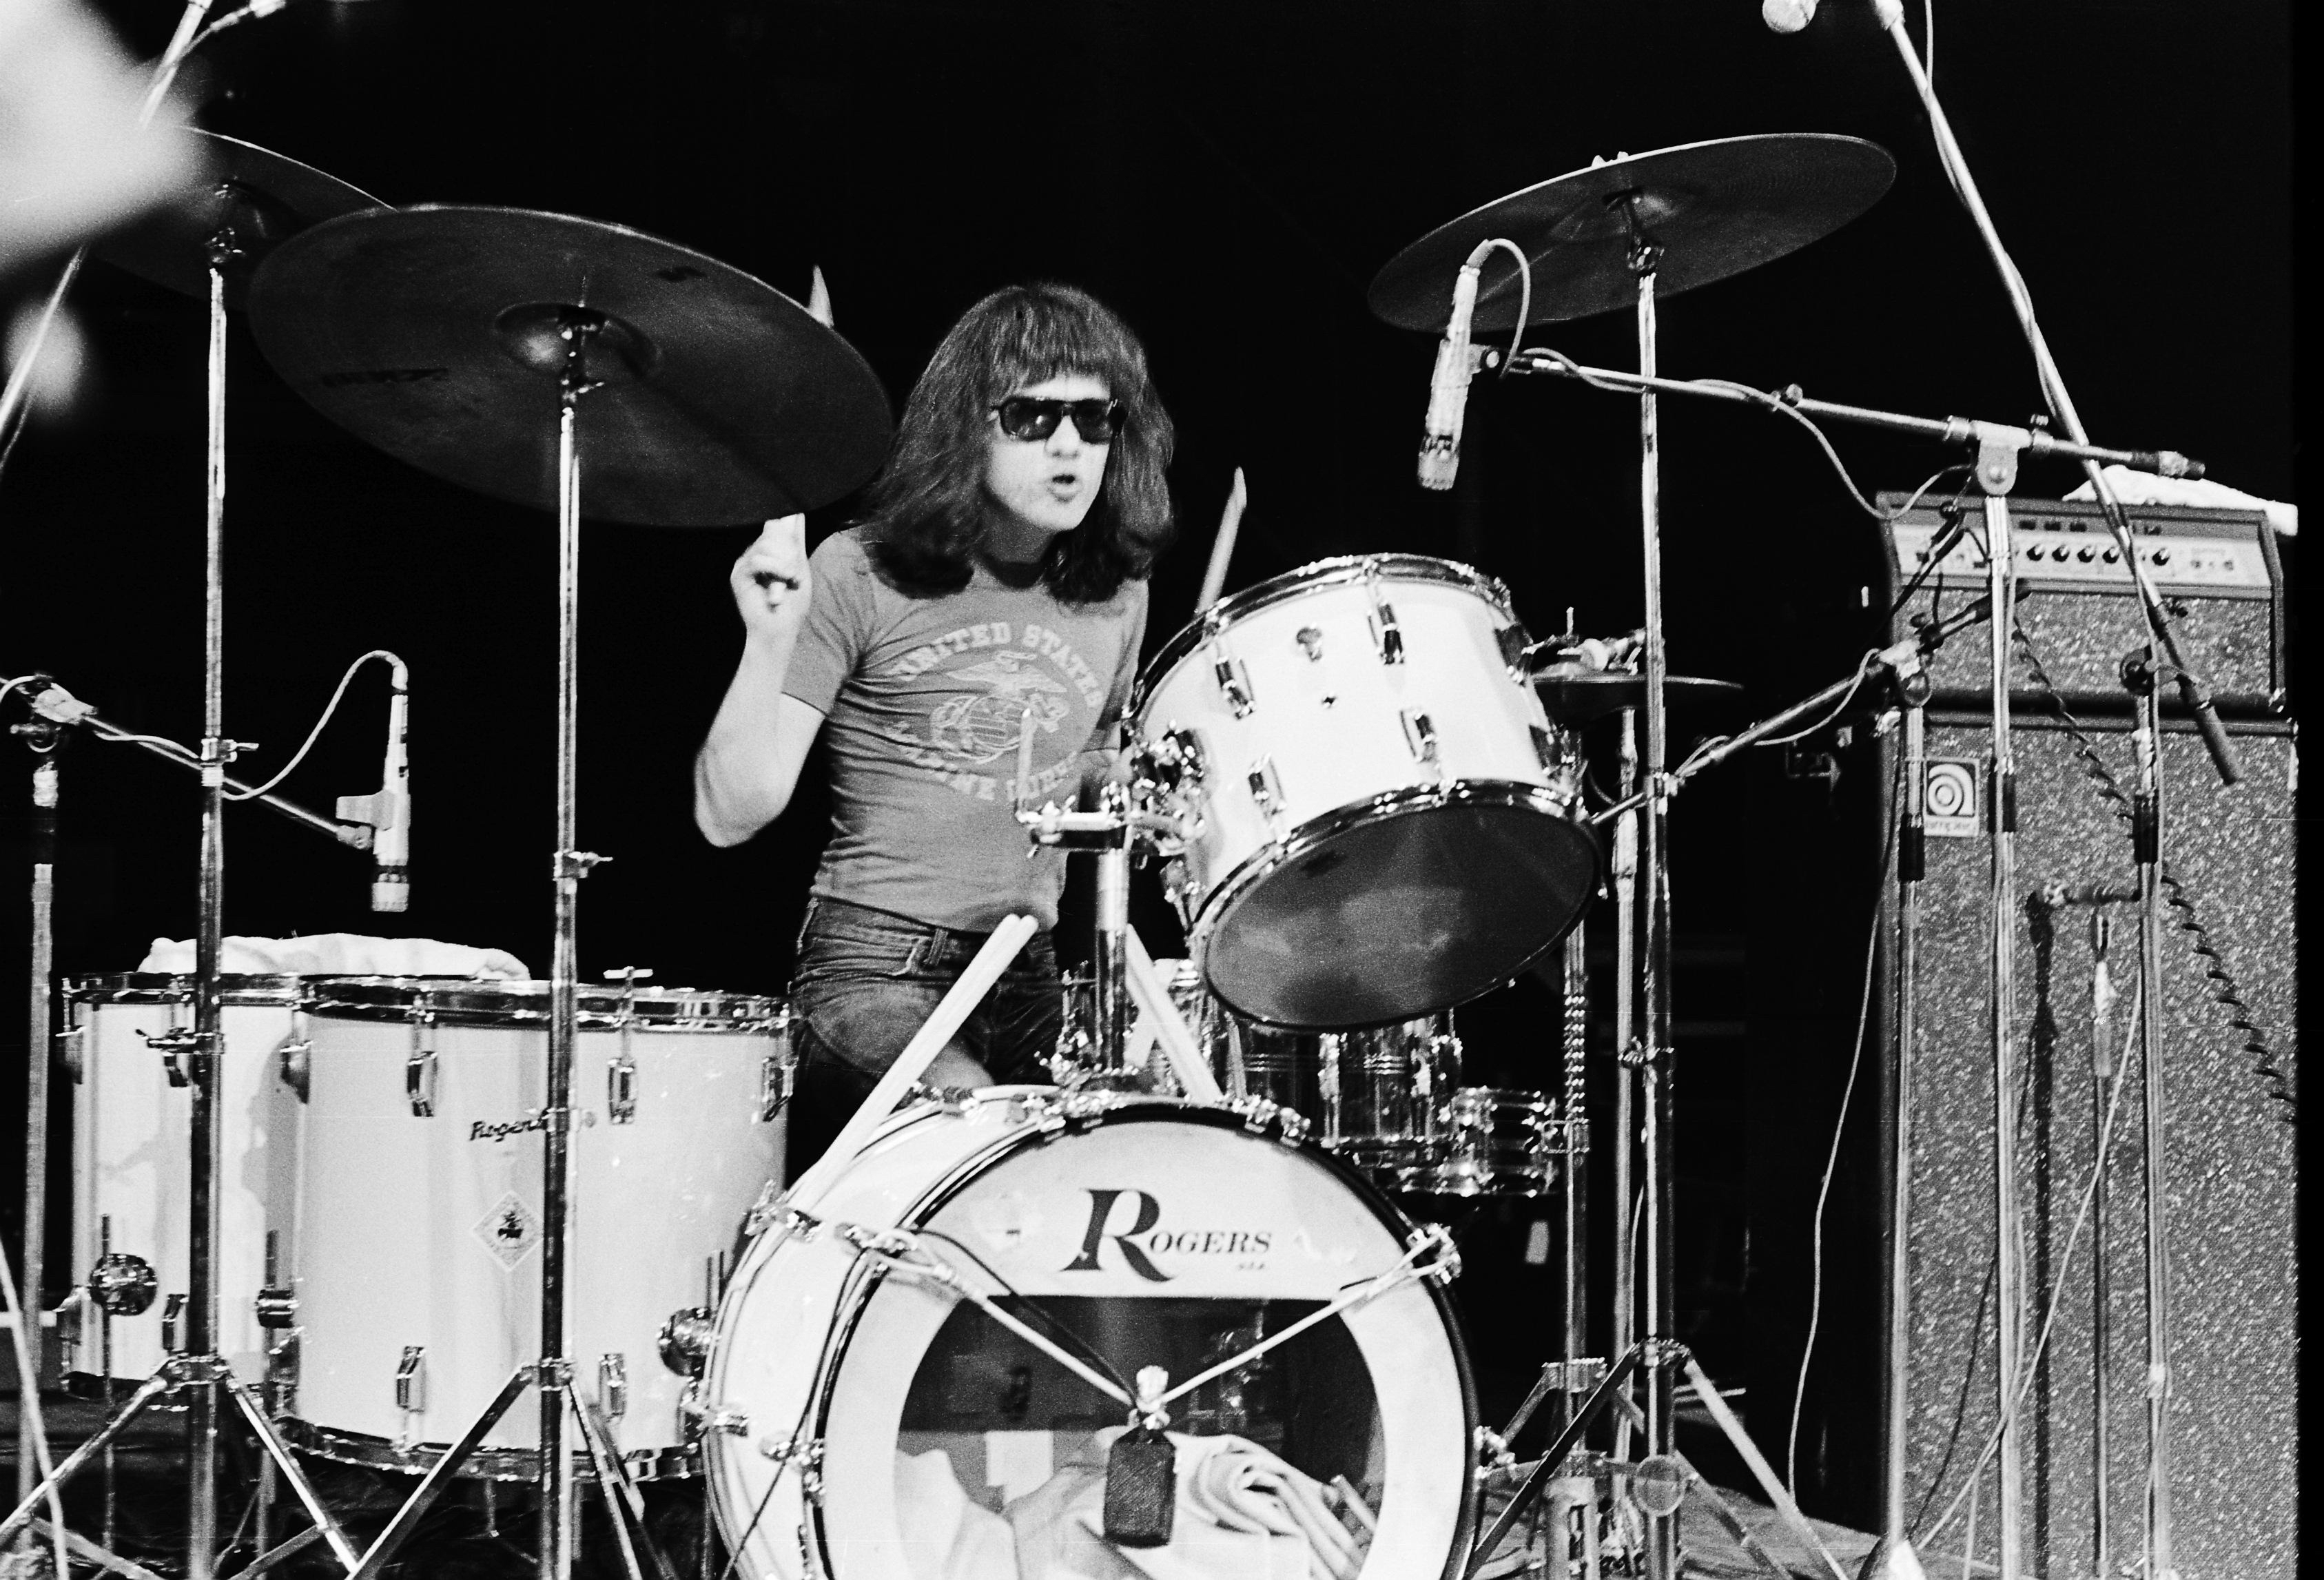 Tommy Ramone (Thomas Erdelyi) performs on stage with The Ramones at The Roundhouse in London on 4th July 1976. (Photo by Gus 